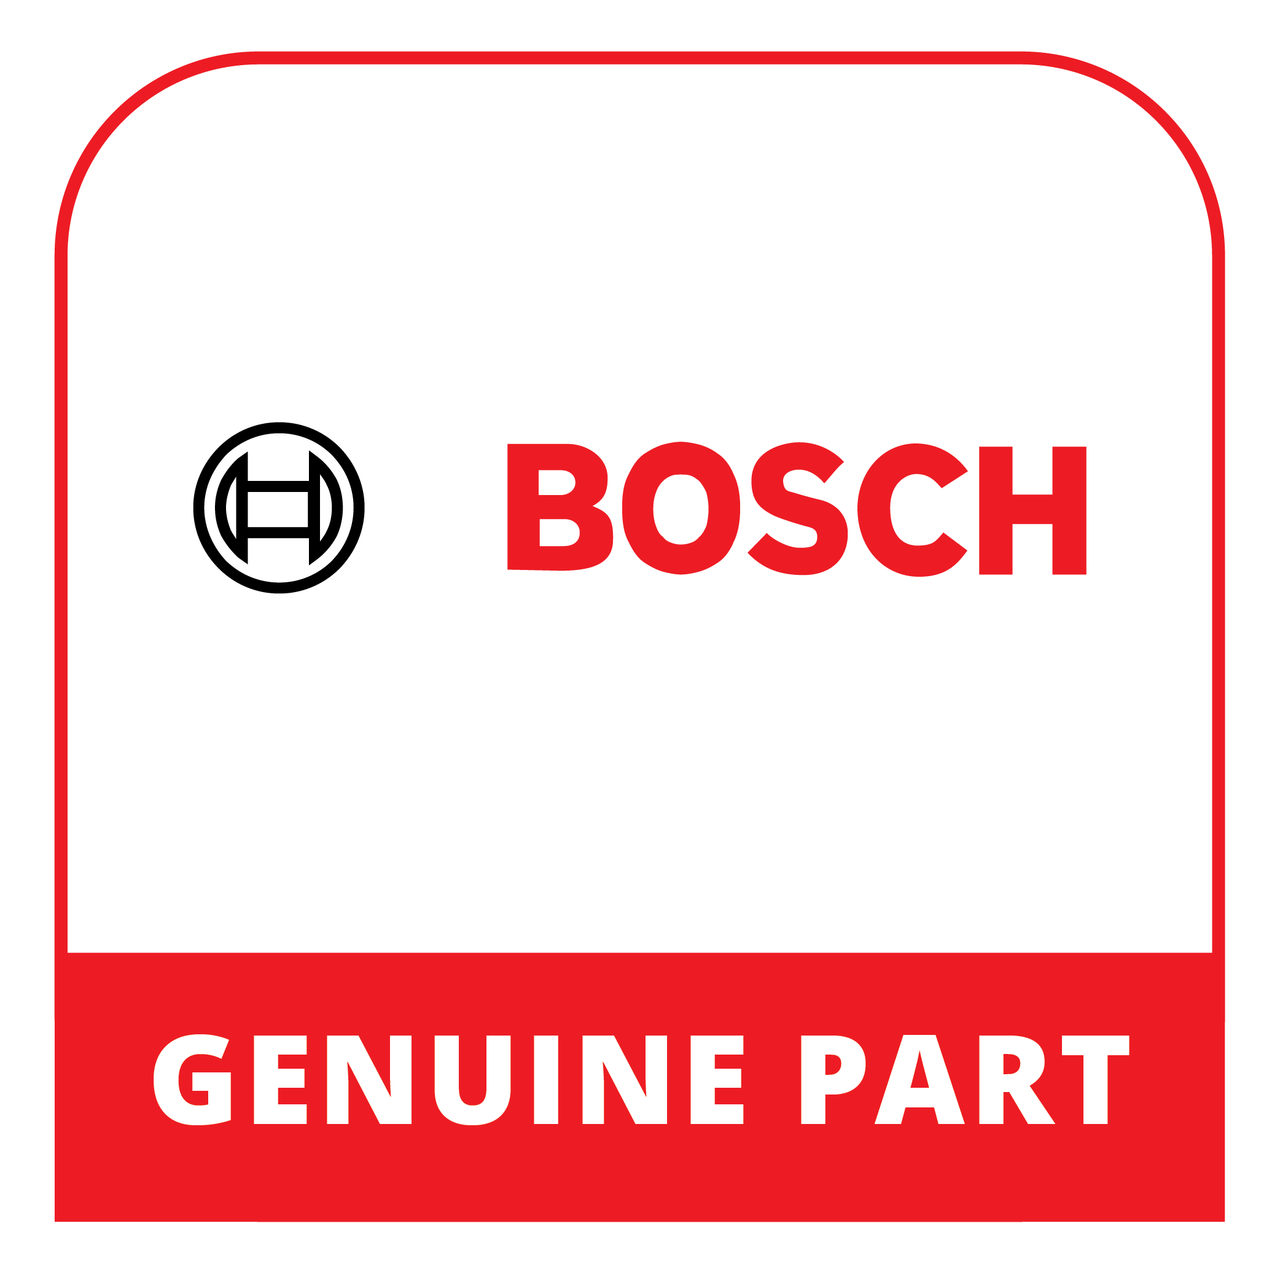 Bosch 12009521 - Container-Condensed - Genuine Bosch (Thermador) Part